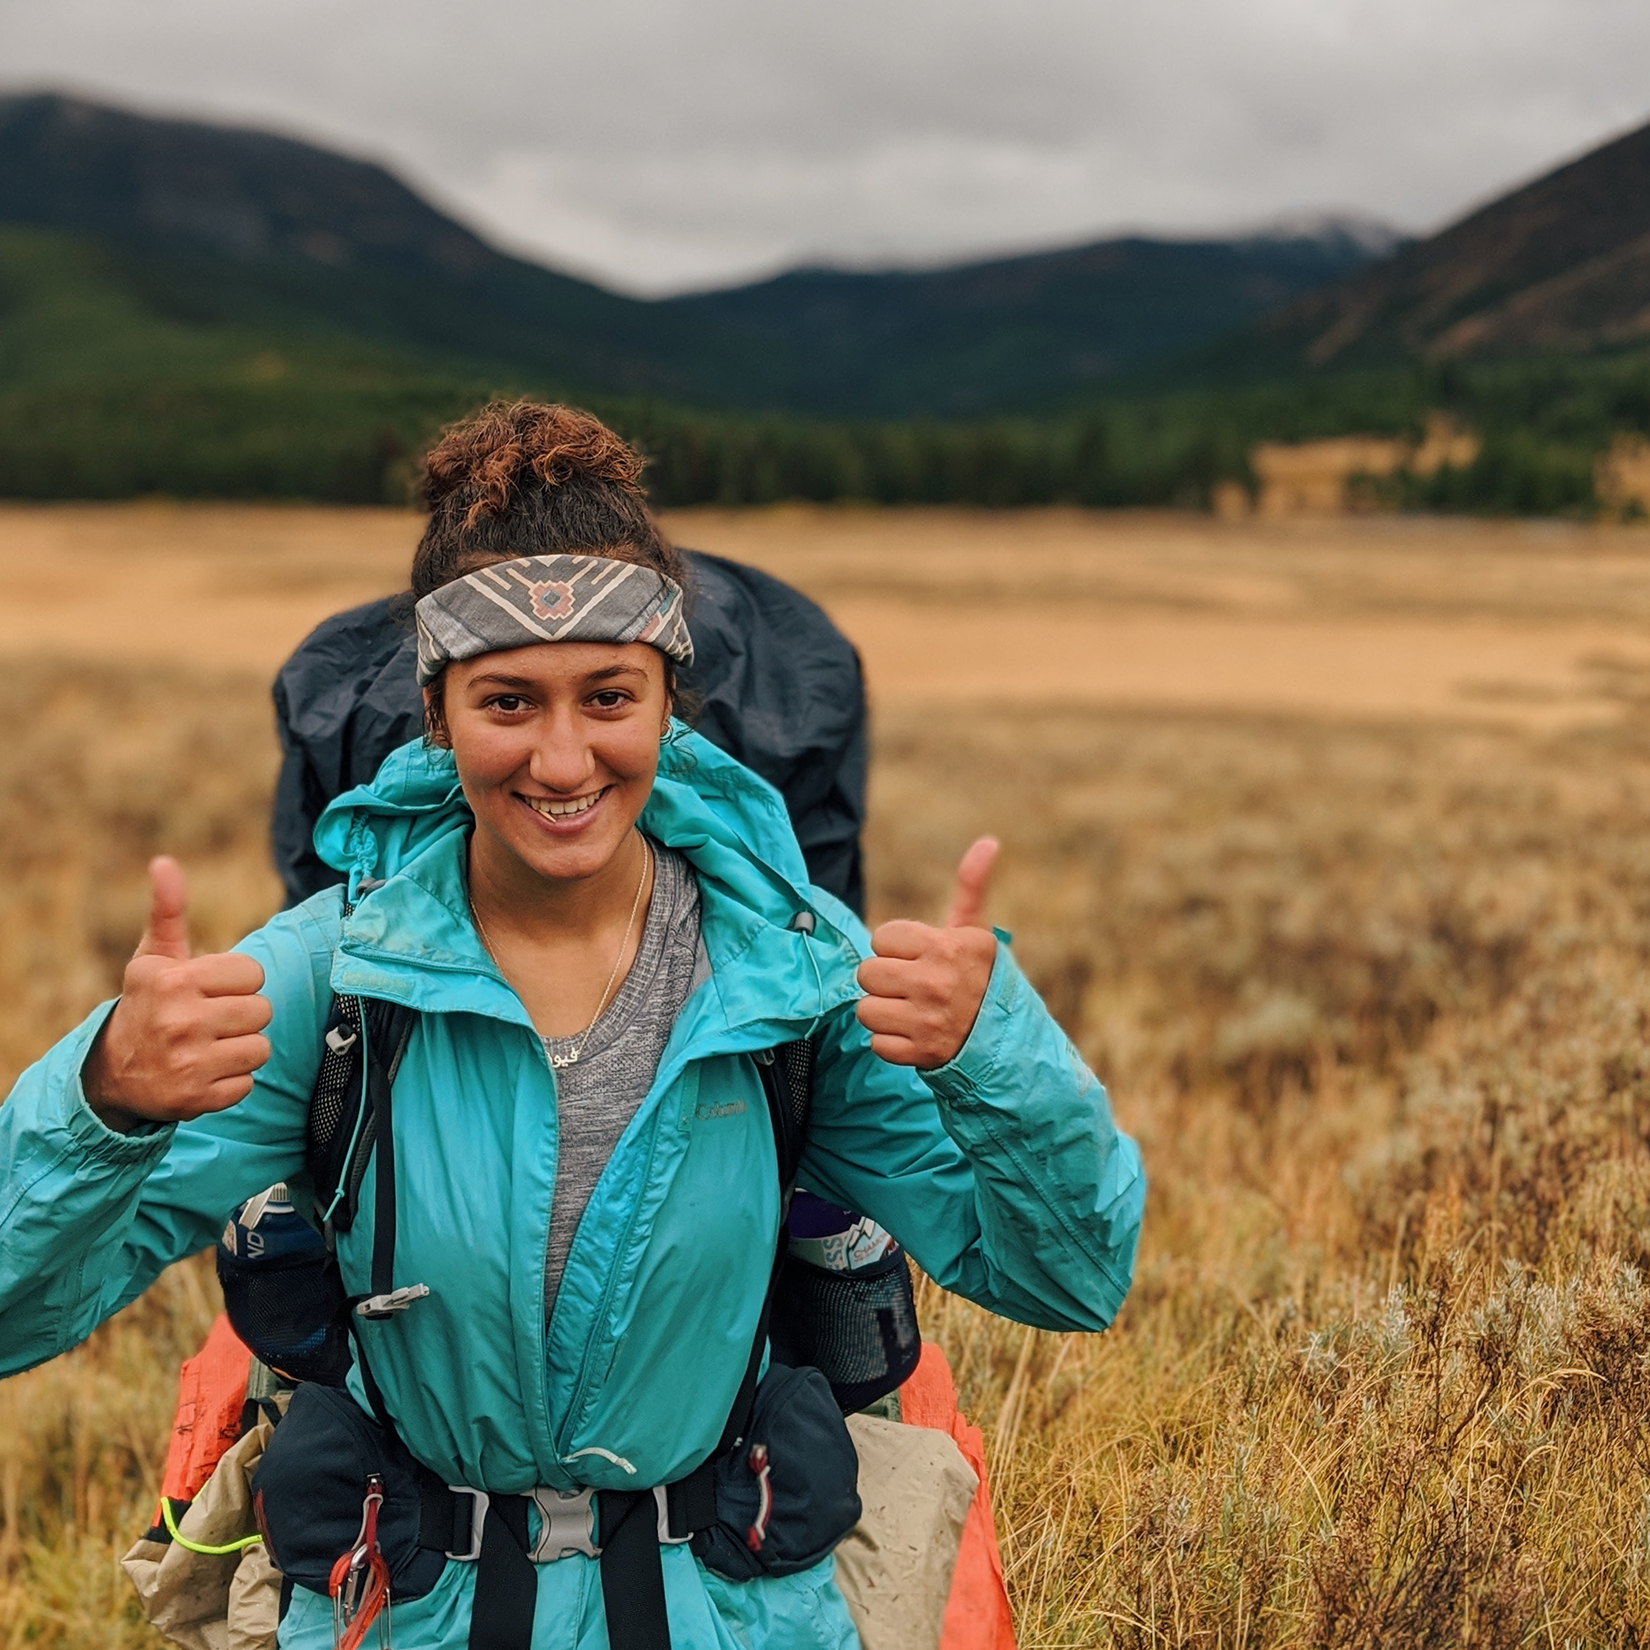 Woman with two thumbs up and backpacking gear on.